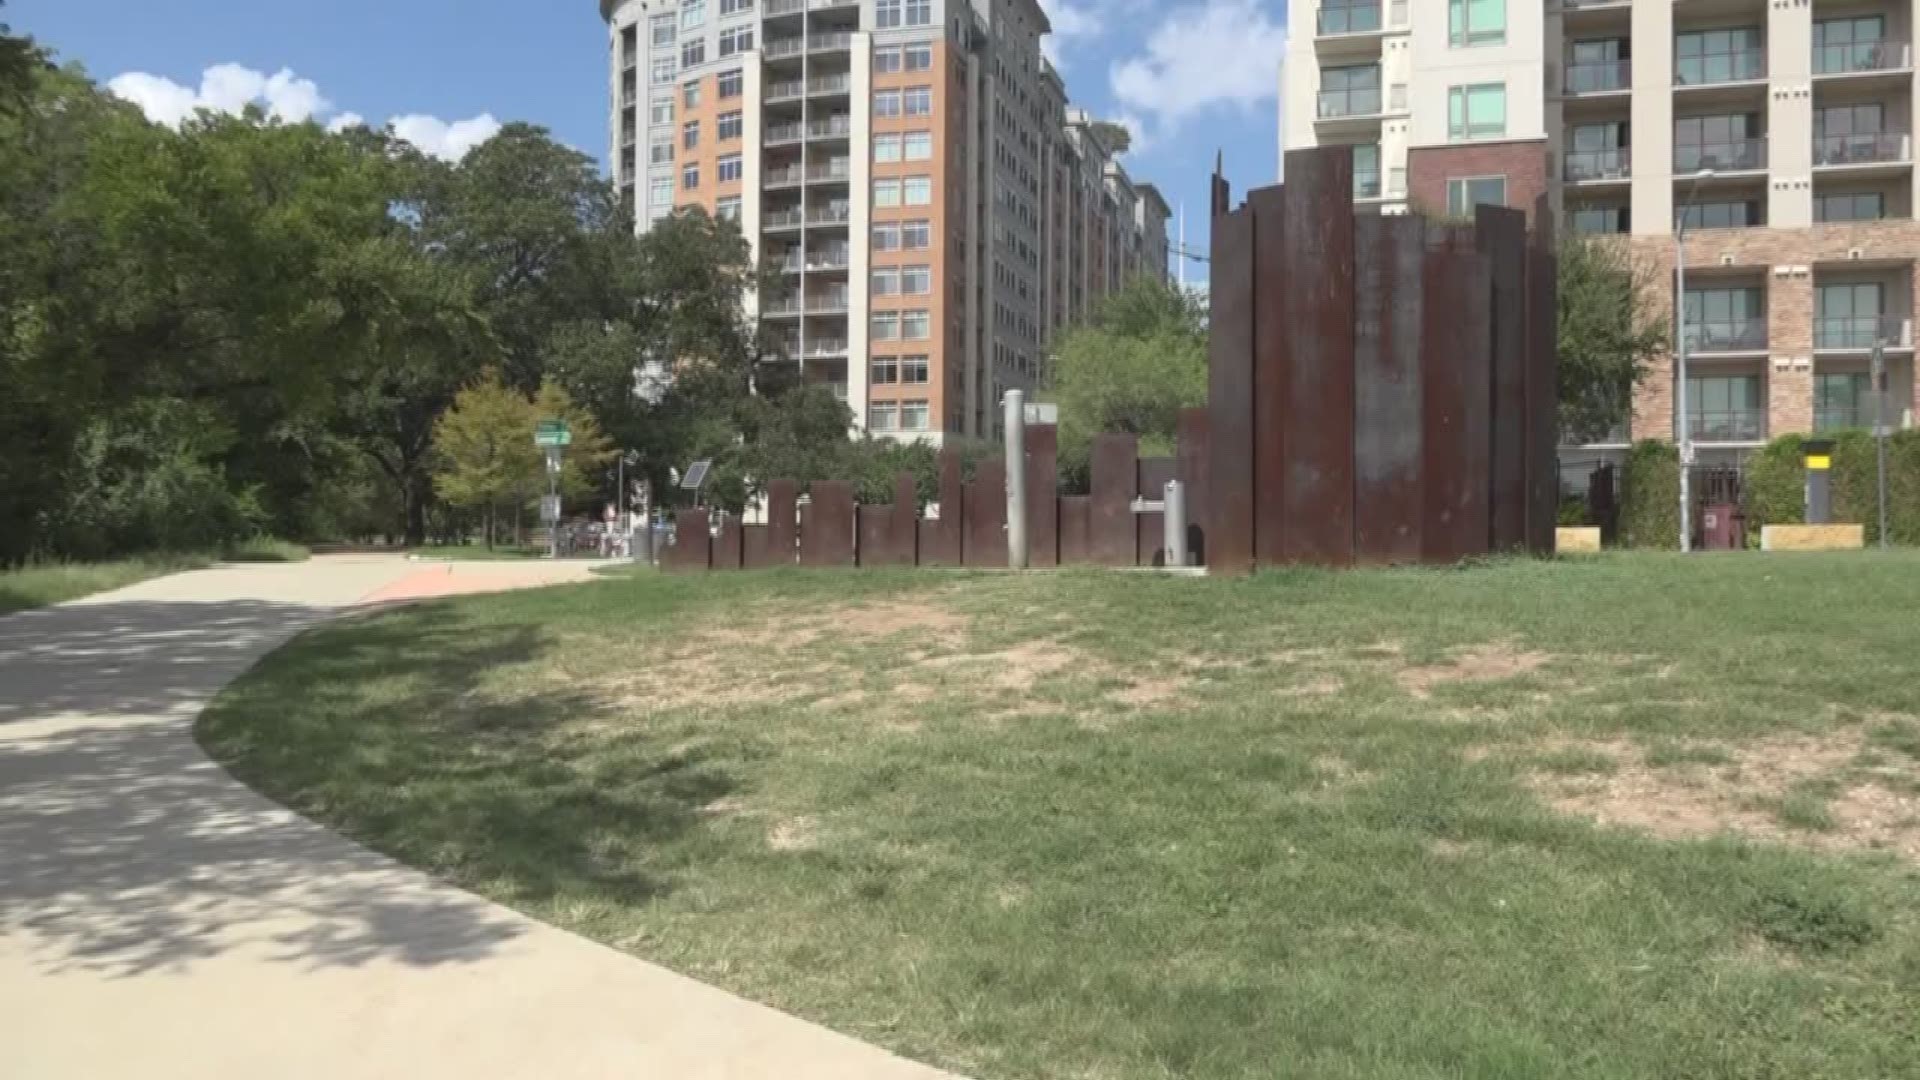 Austin police are investigating after witnesses report a man attacked a woman running on the hike and bike trail.